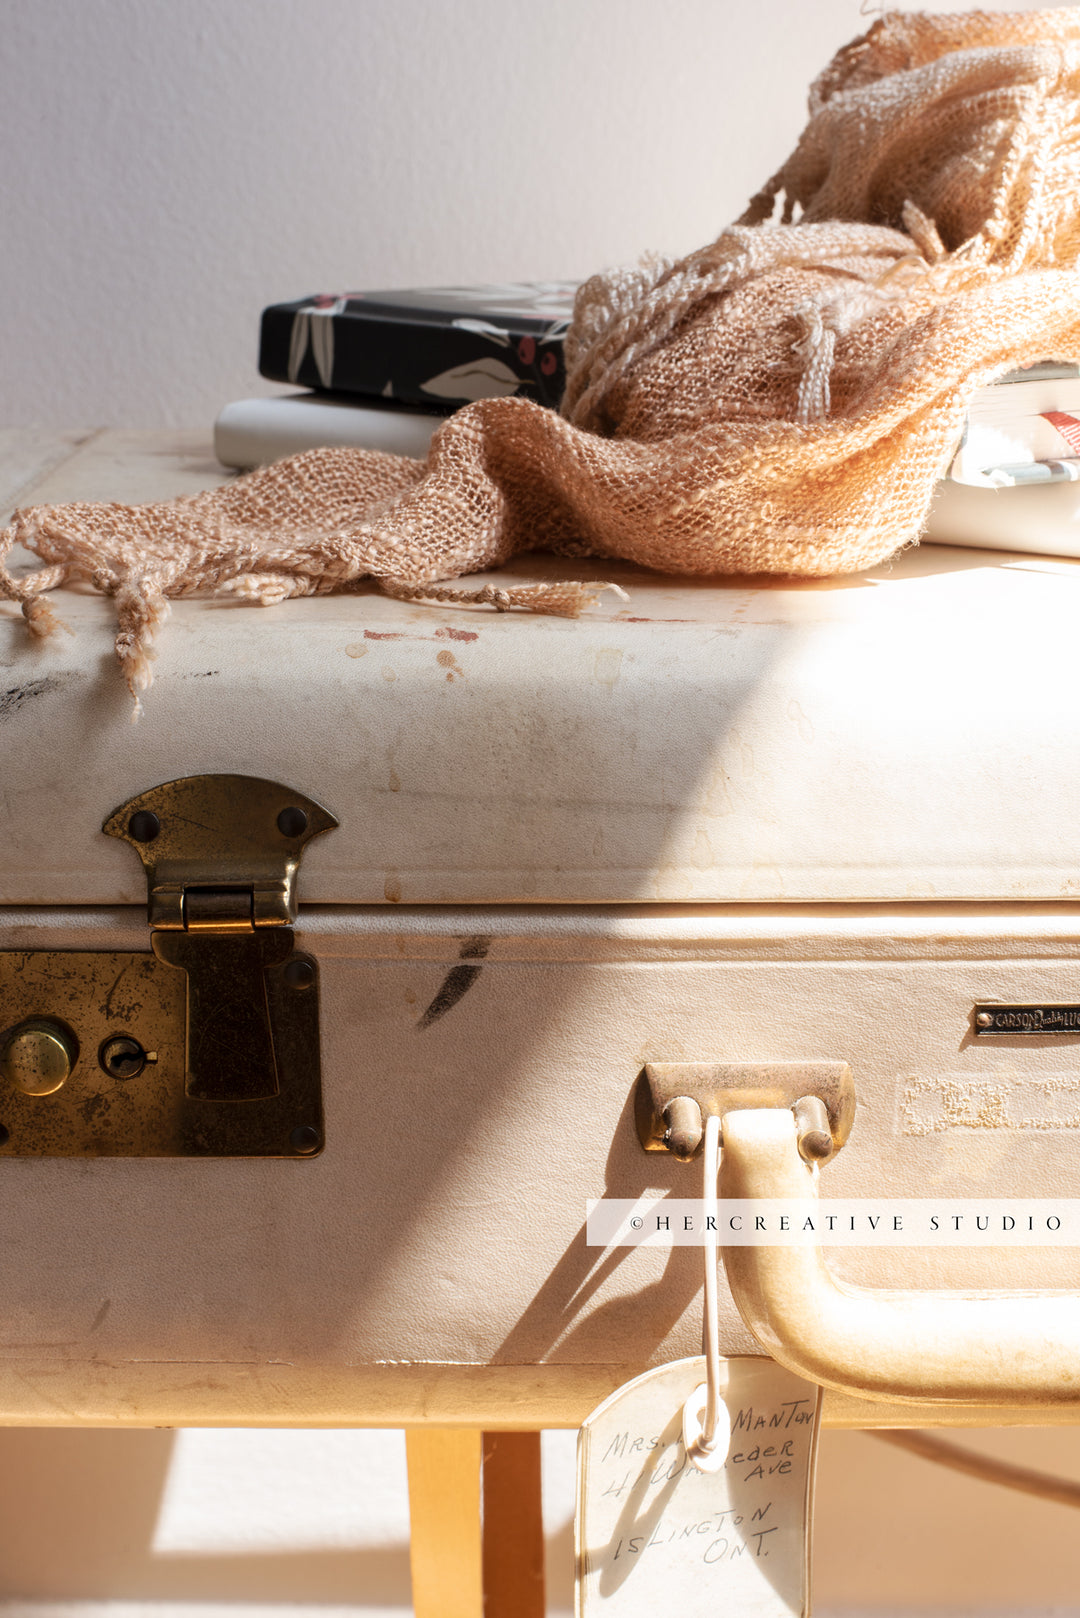 Peach Scarf on Vintage Suitcase in Sunshine, Stock Image